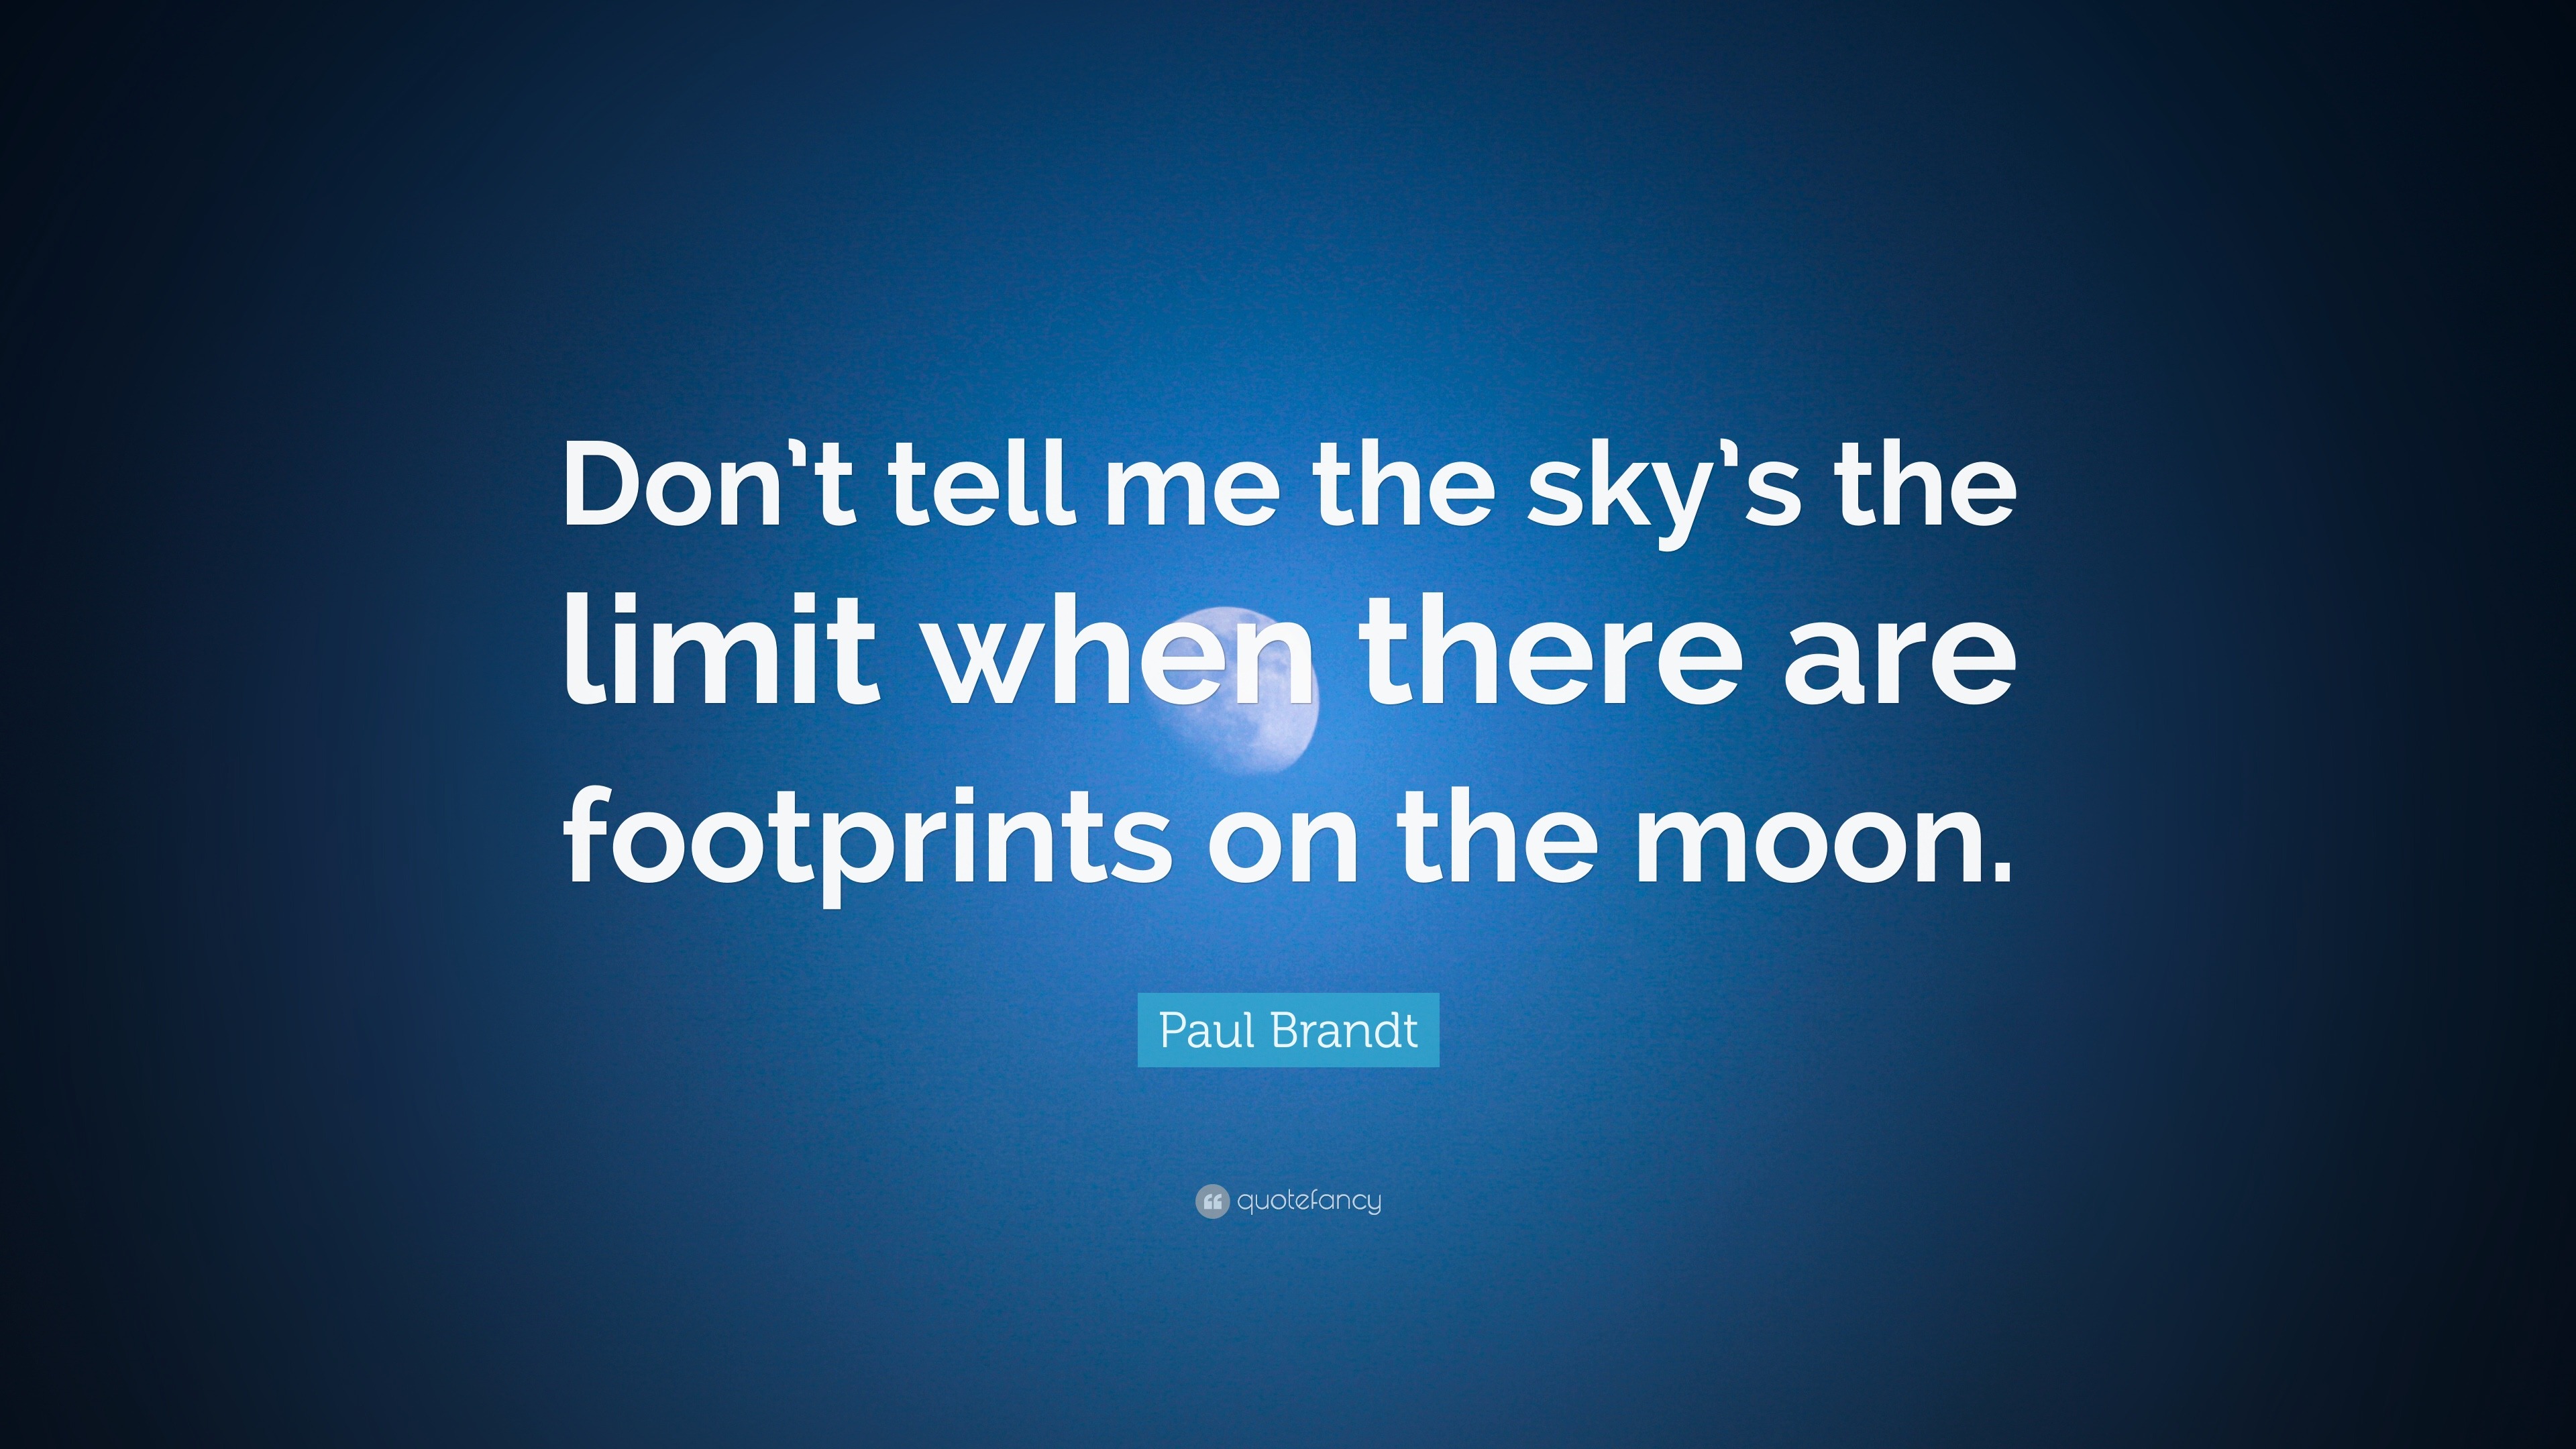 124117 Paul Brandt Quote Don t tell me the sky s the limit when there are